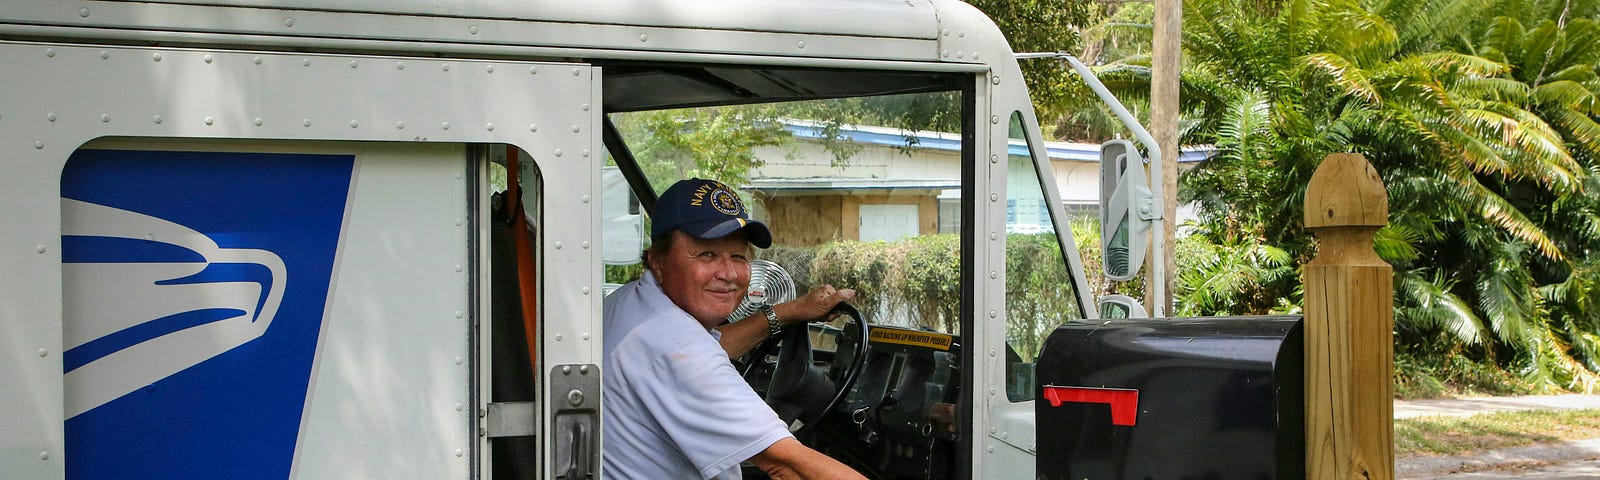 A postman in his car delivering mail.